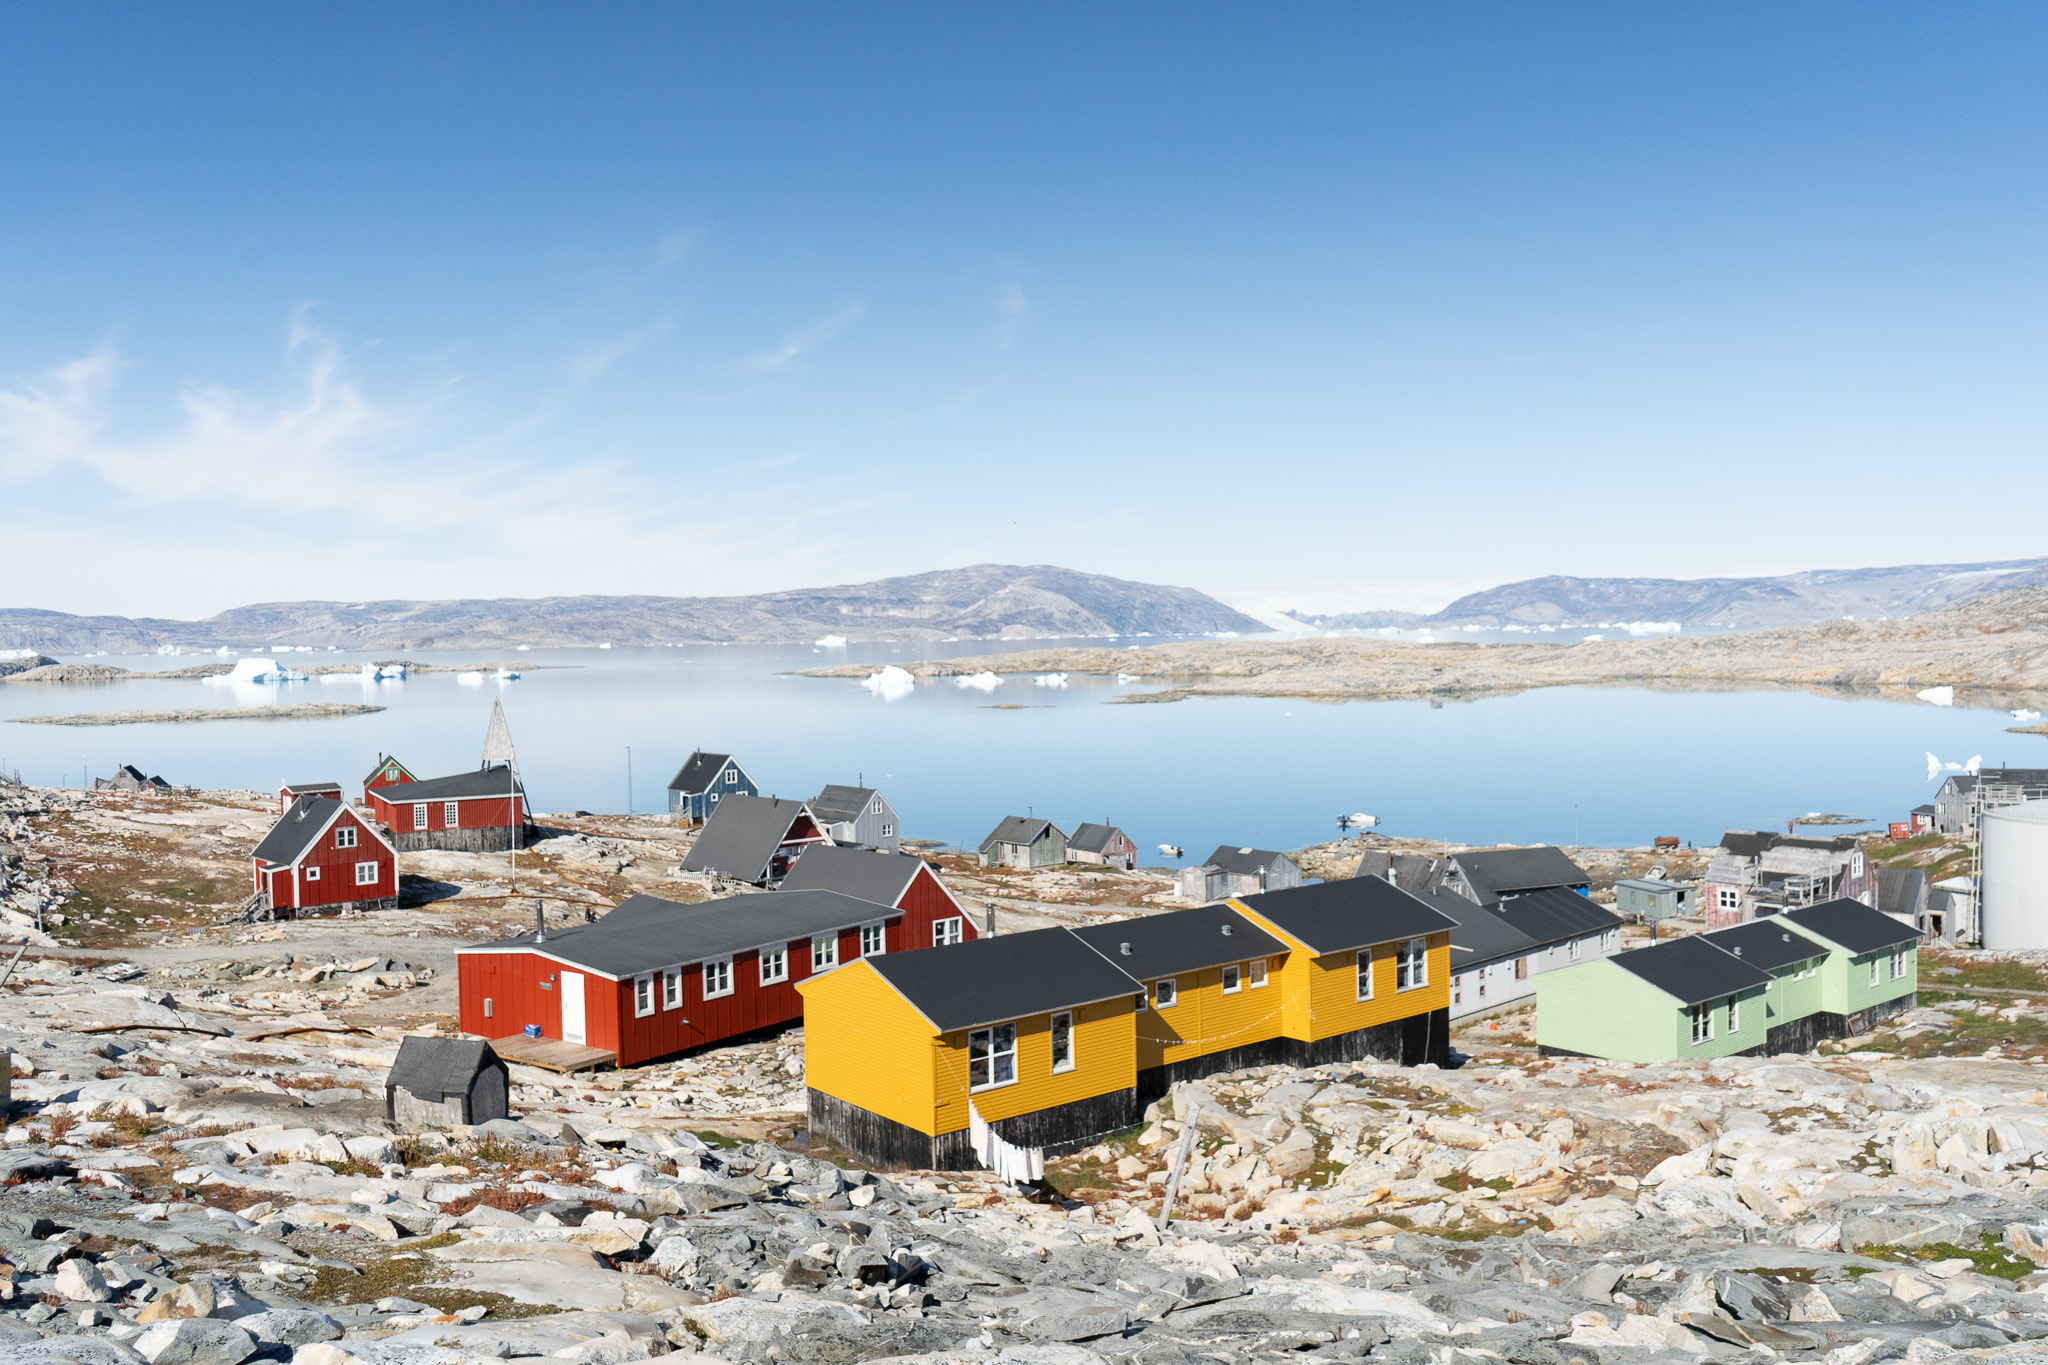 View over Isertoq and the Ice cap. Photo by Visit East Greenland